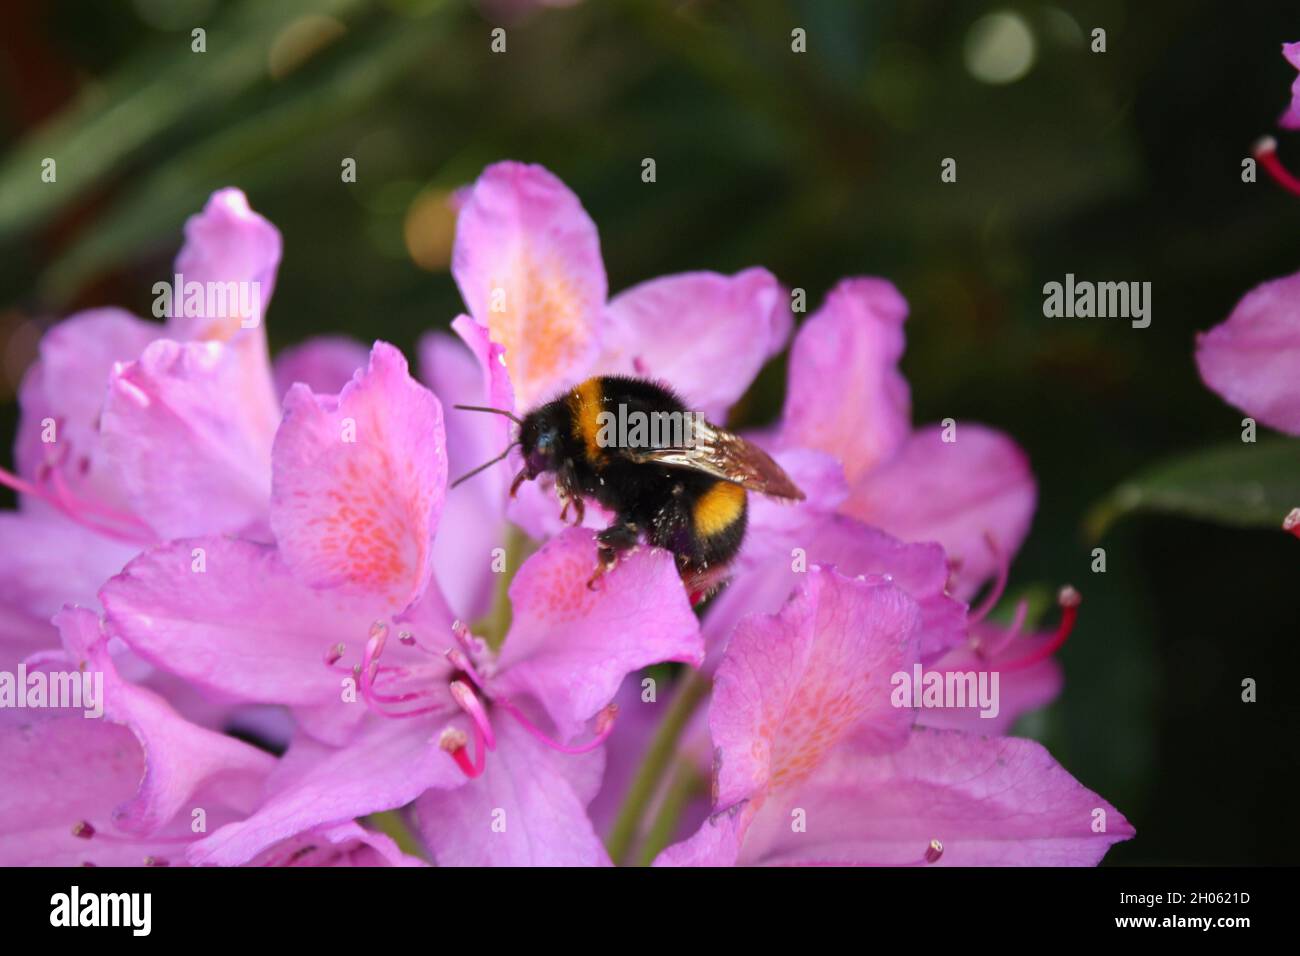 A bumble bee rests on a pink-purple flower. Stock Photo